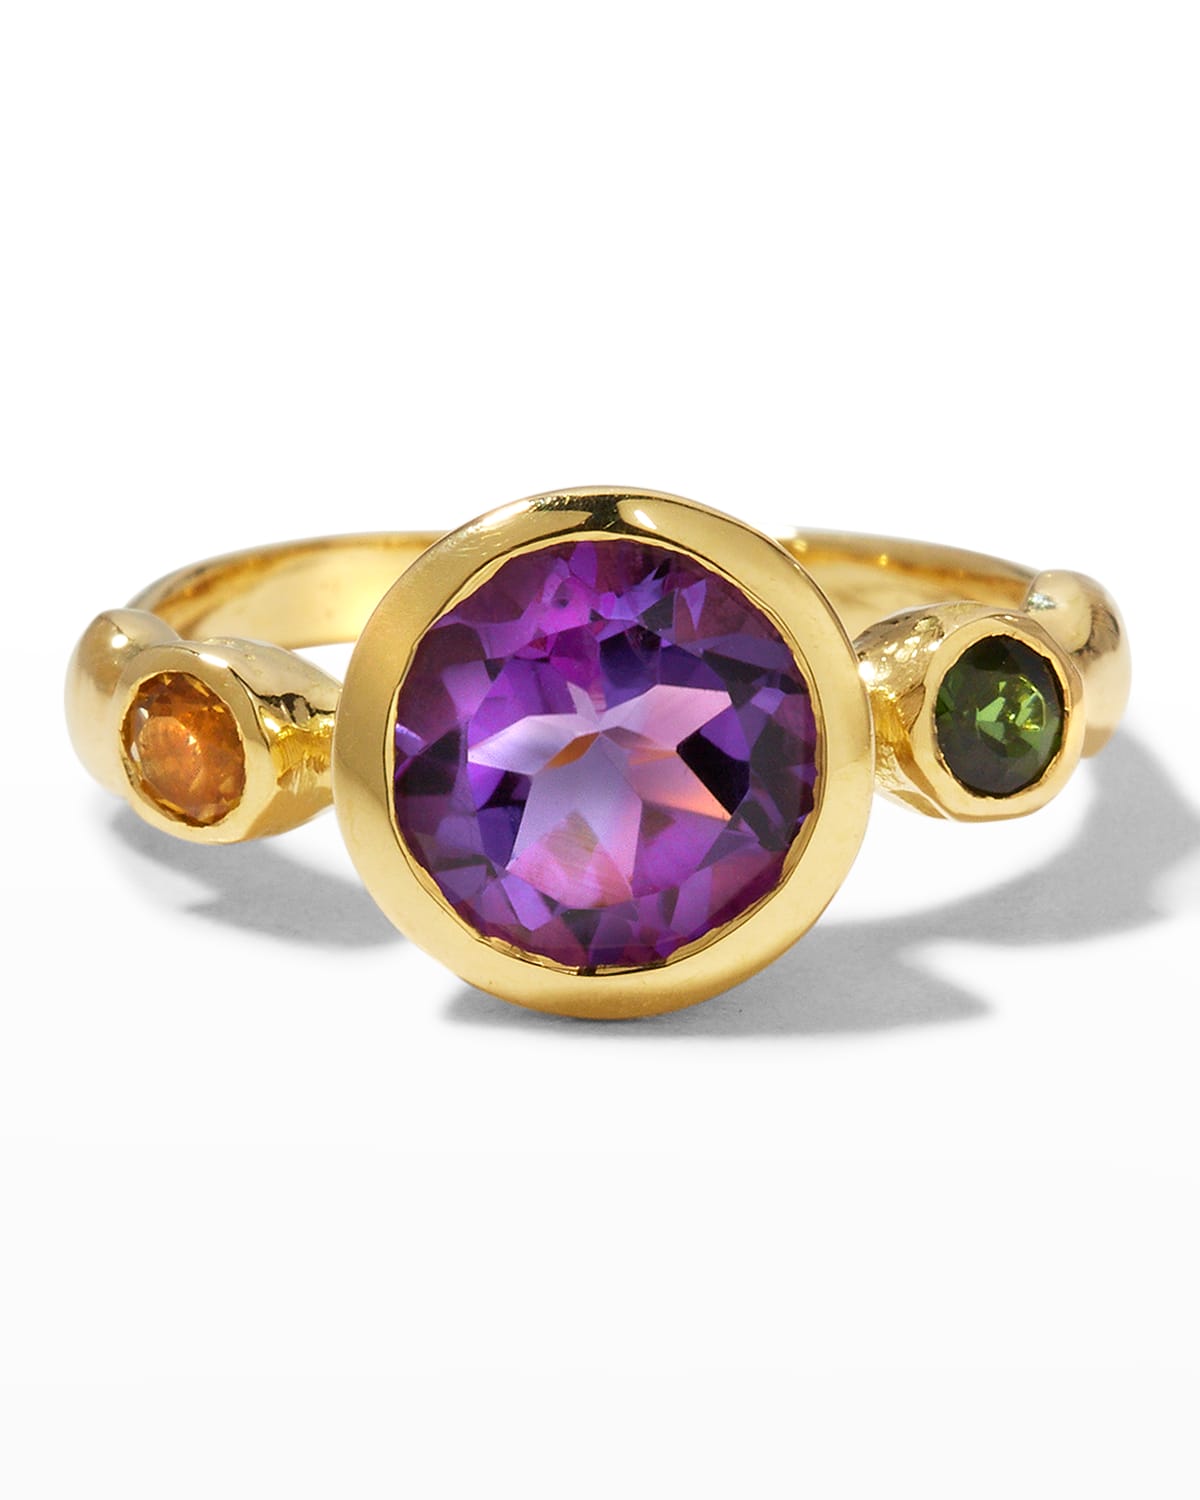 Sybil Ring with Amethyst, Tourmaline and Citrine